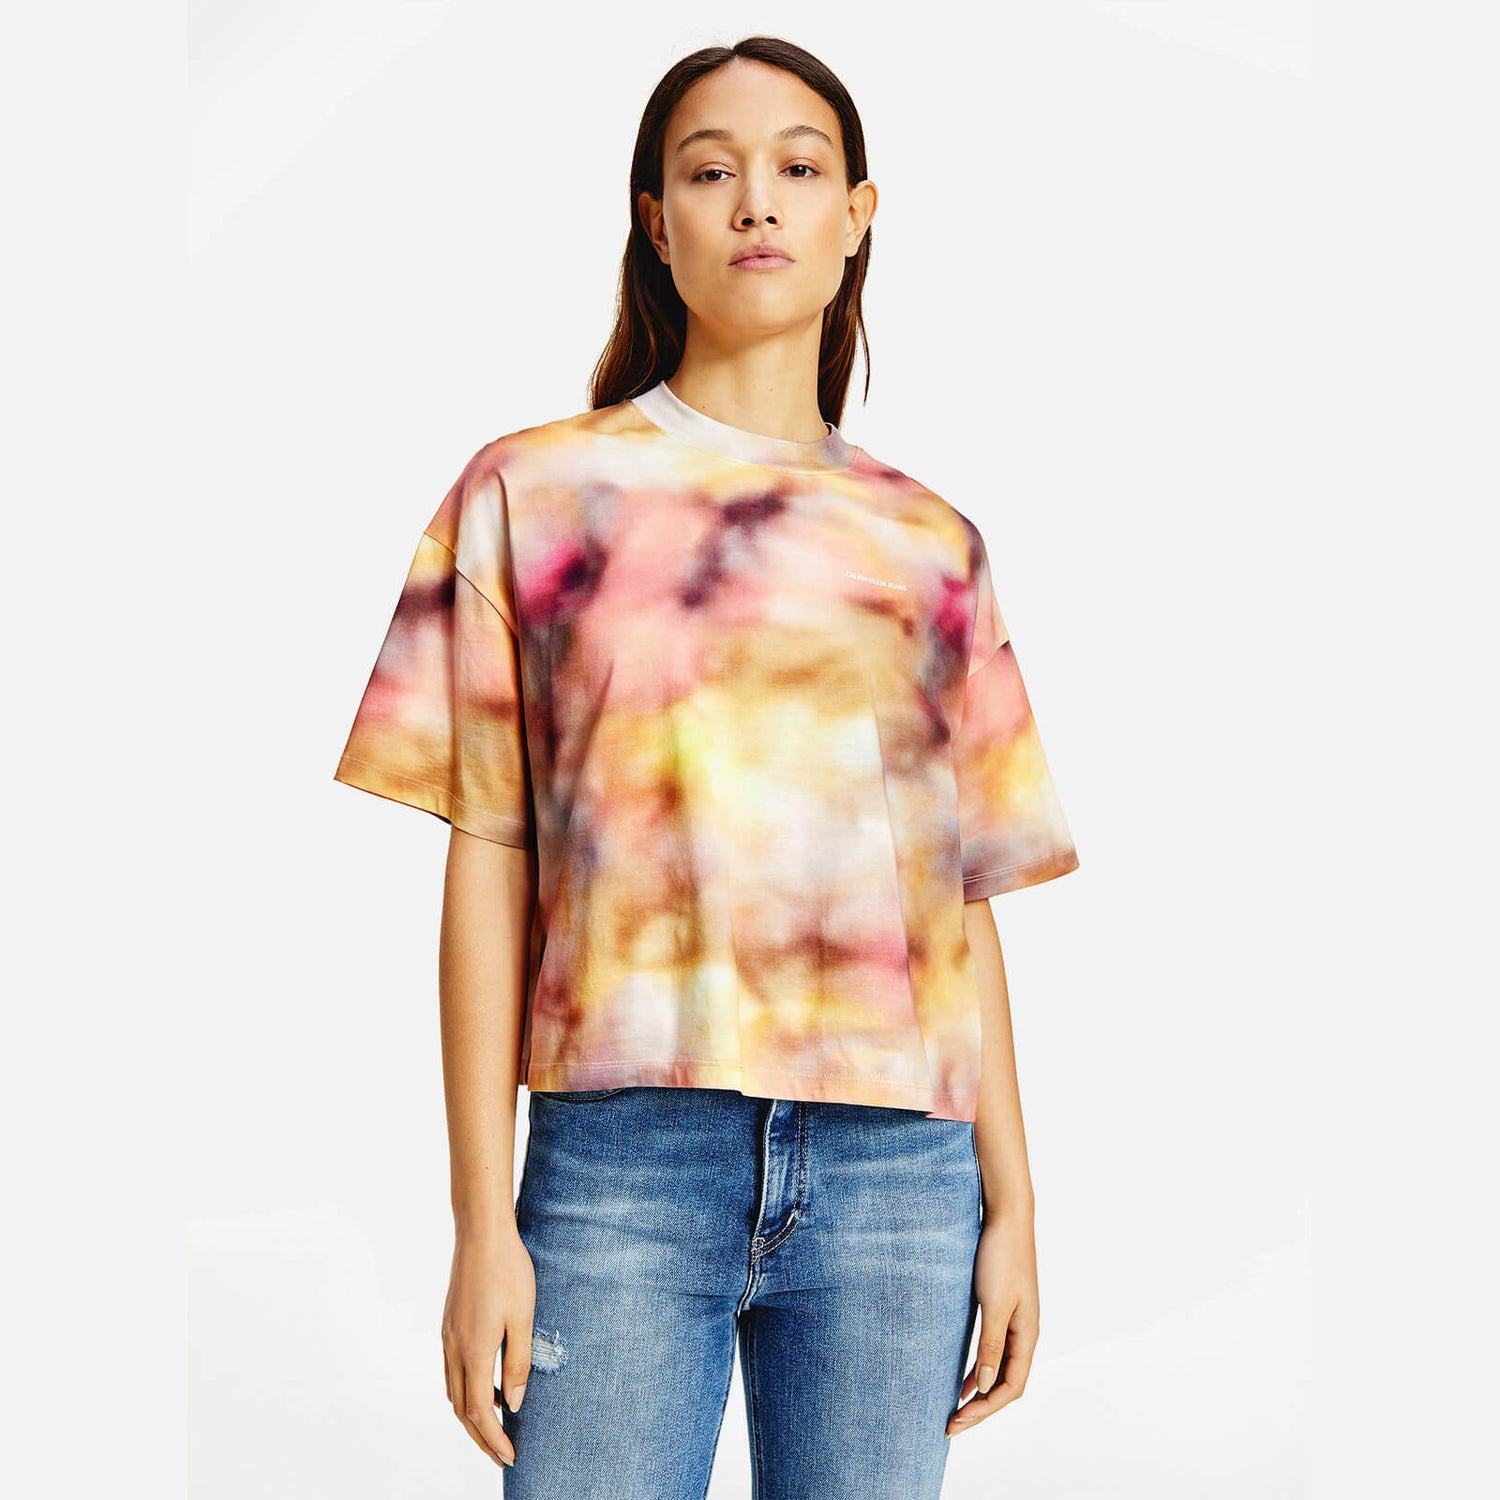 Calvin Klein Jeans Women's Organic Cotton All Over Print T-Shirt - Blurred Abstract Aop - M